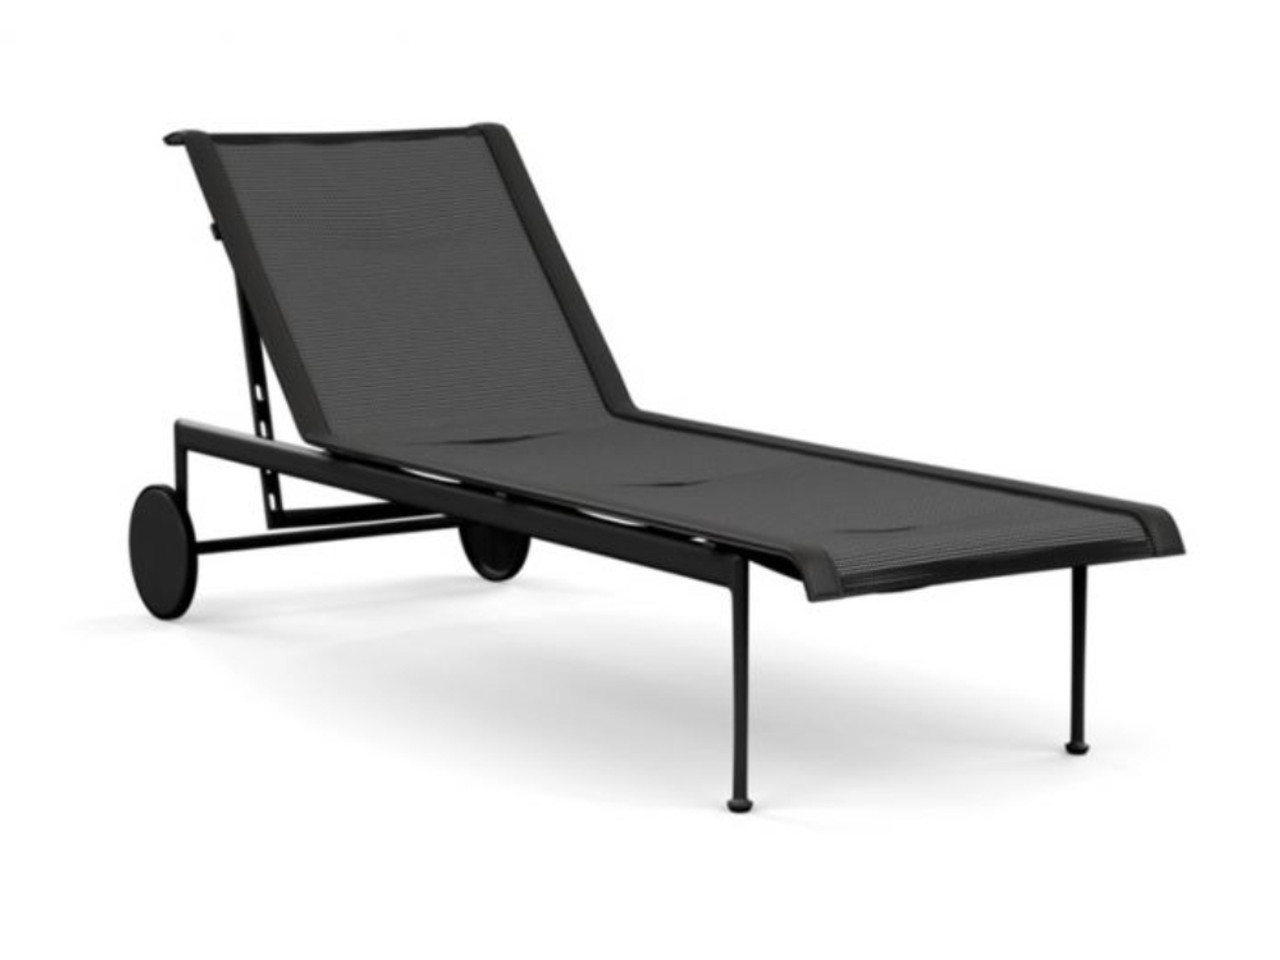 1966 Outdoor Adjustable Chaise Lounge - Quickship